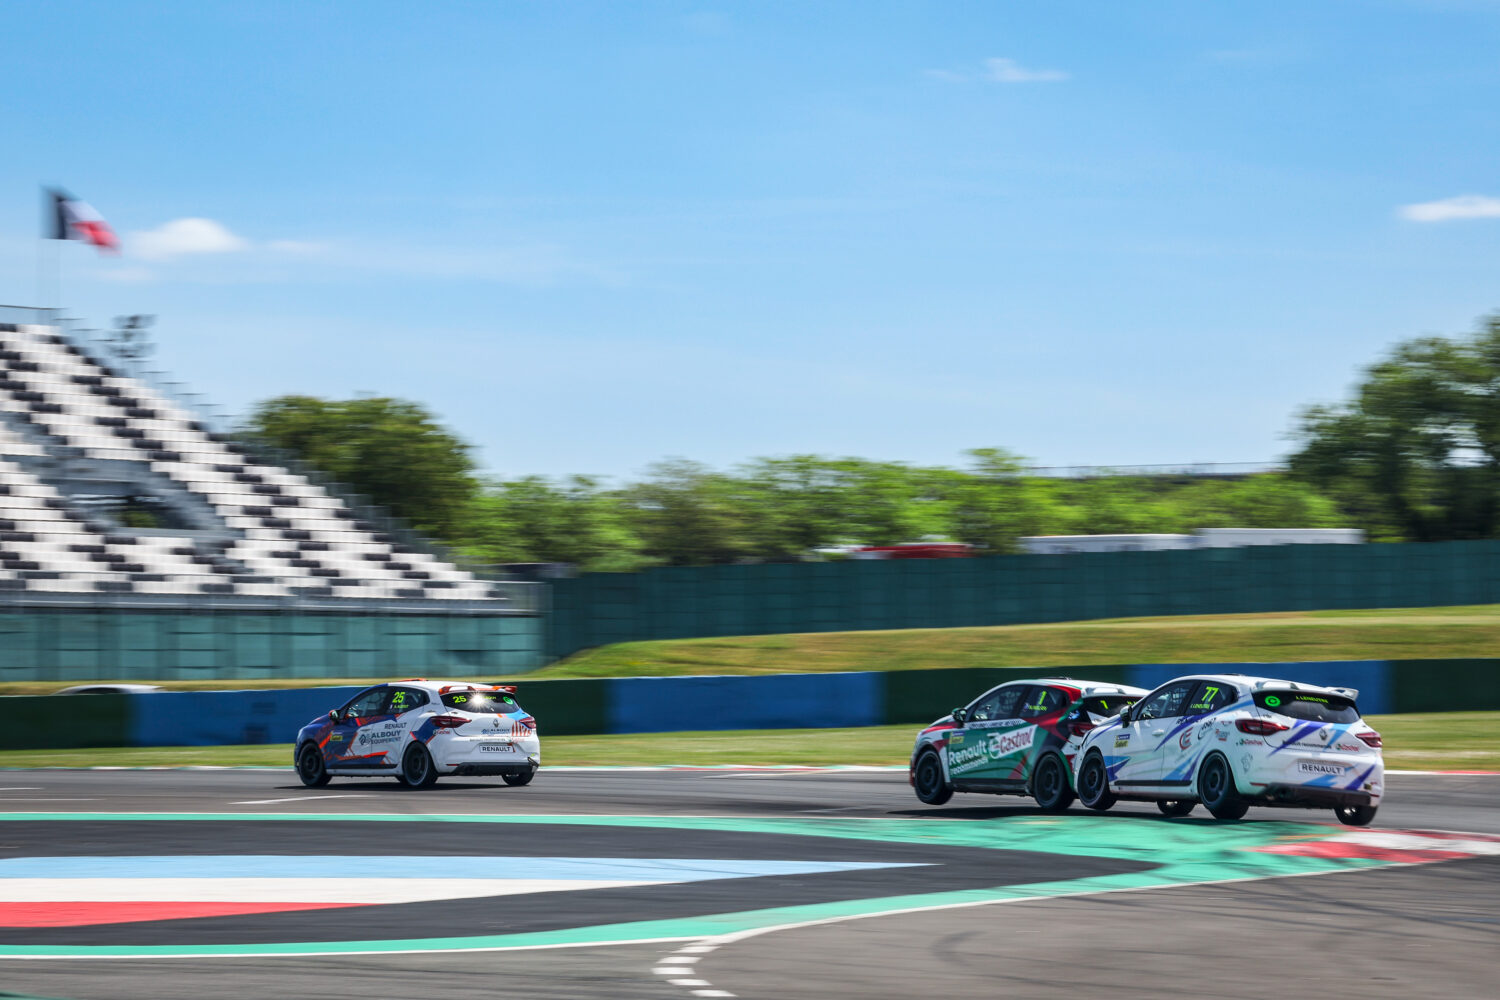 Pouget wins under sunny skies at Magny-Cours